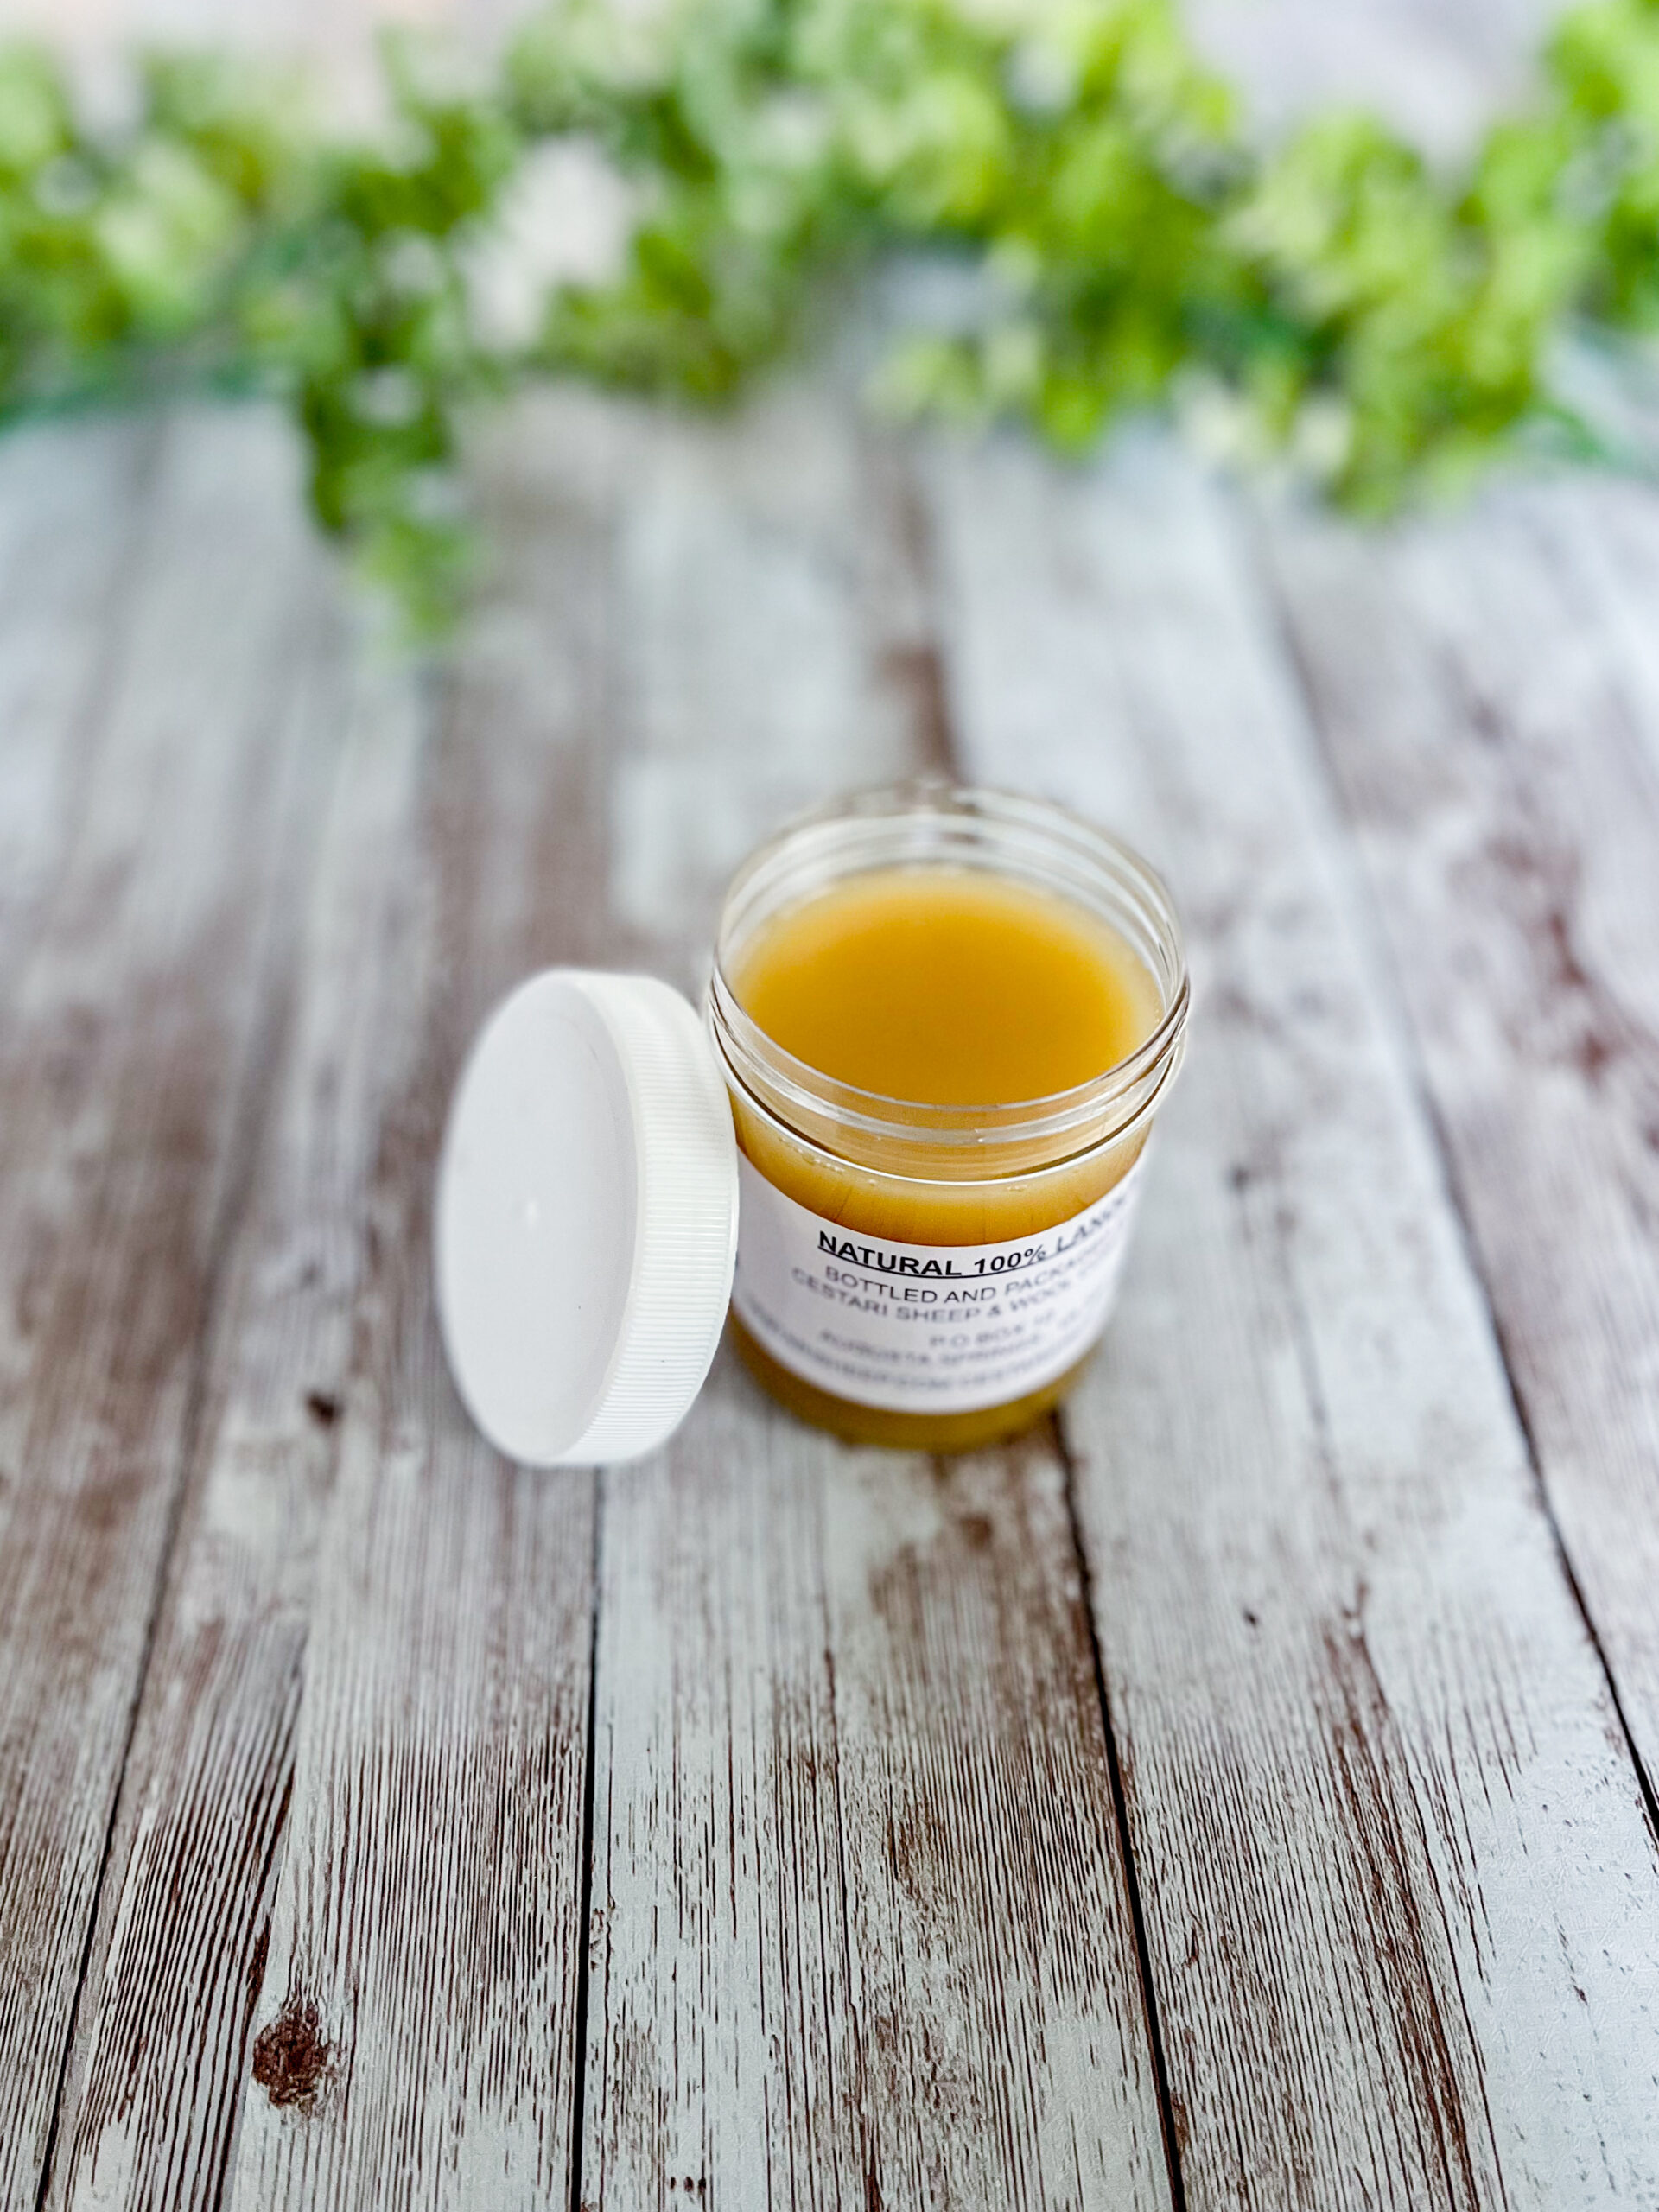 A jar of 100% Virginia-farmed lanolin sits on a wood plank with greenery in the background